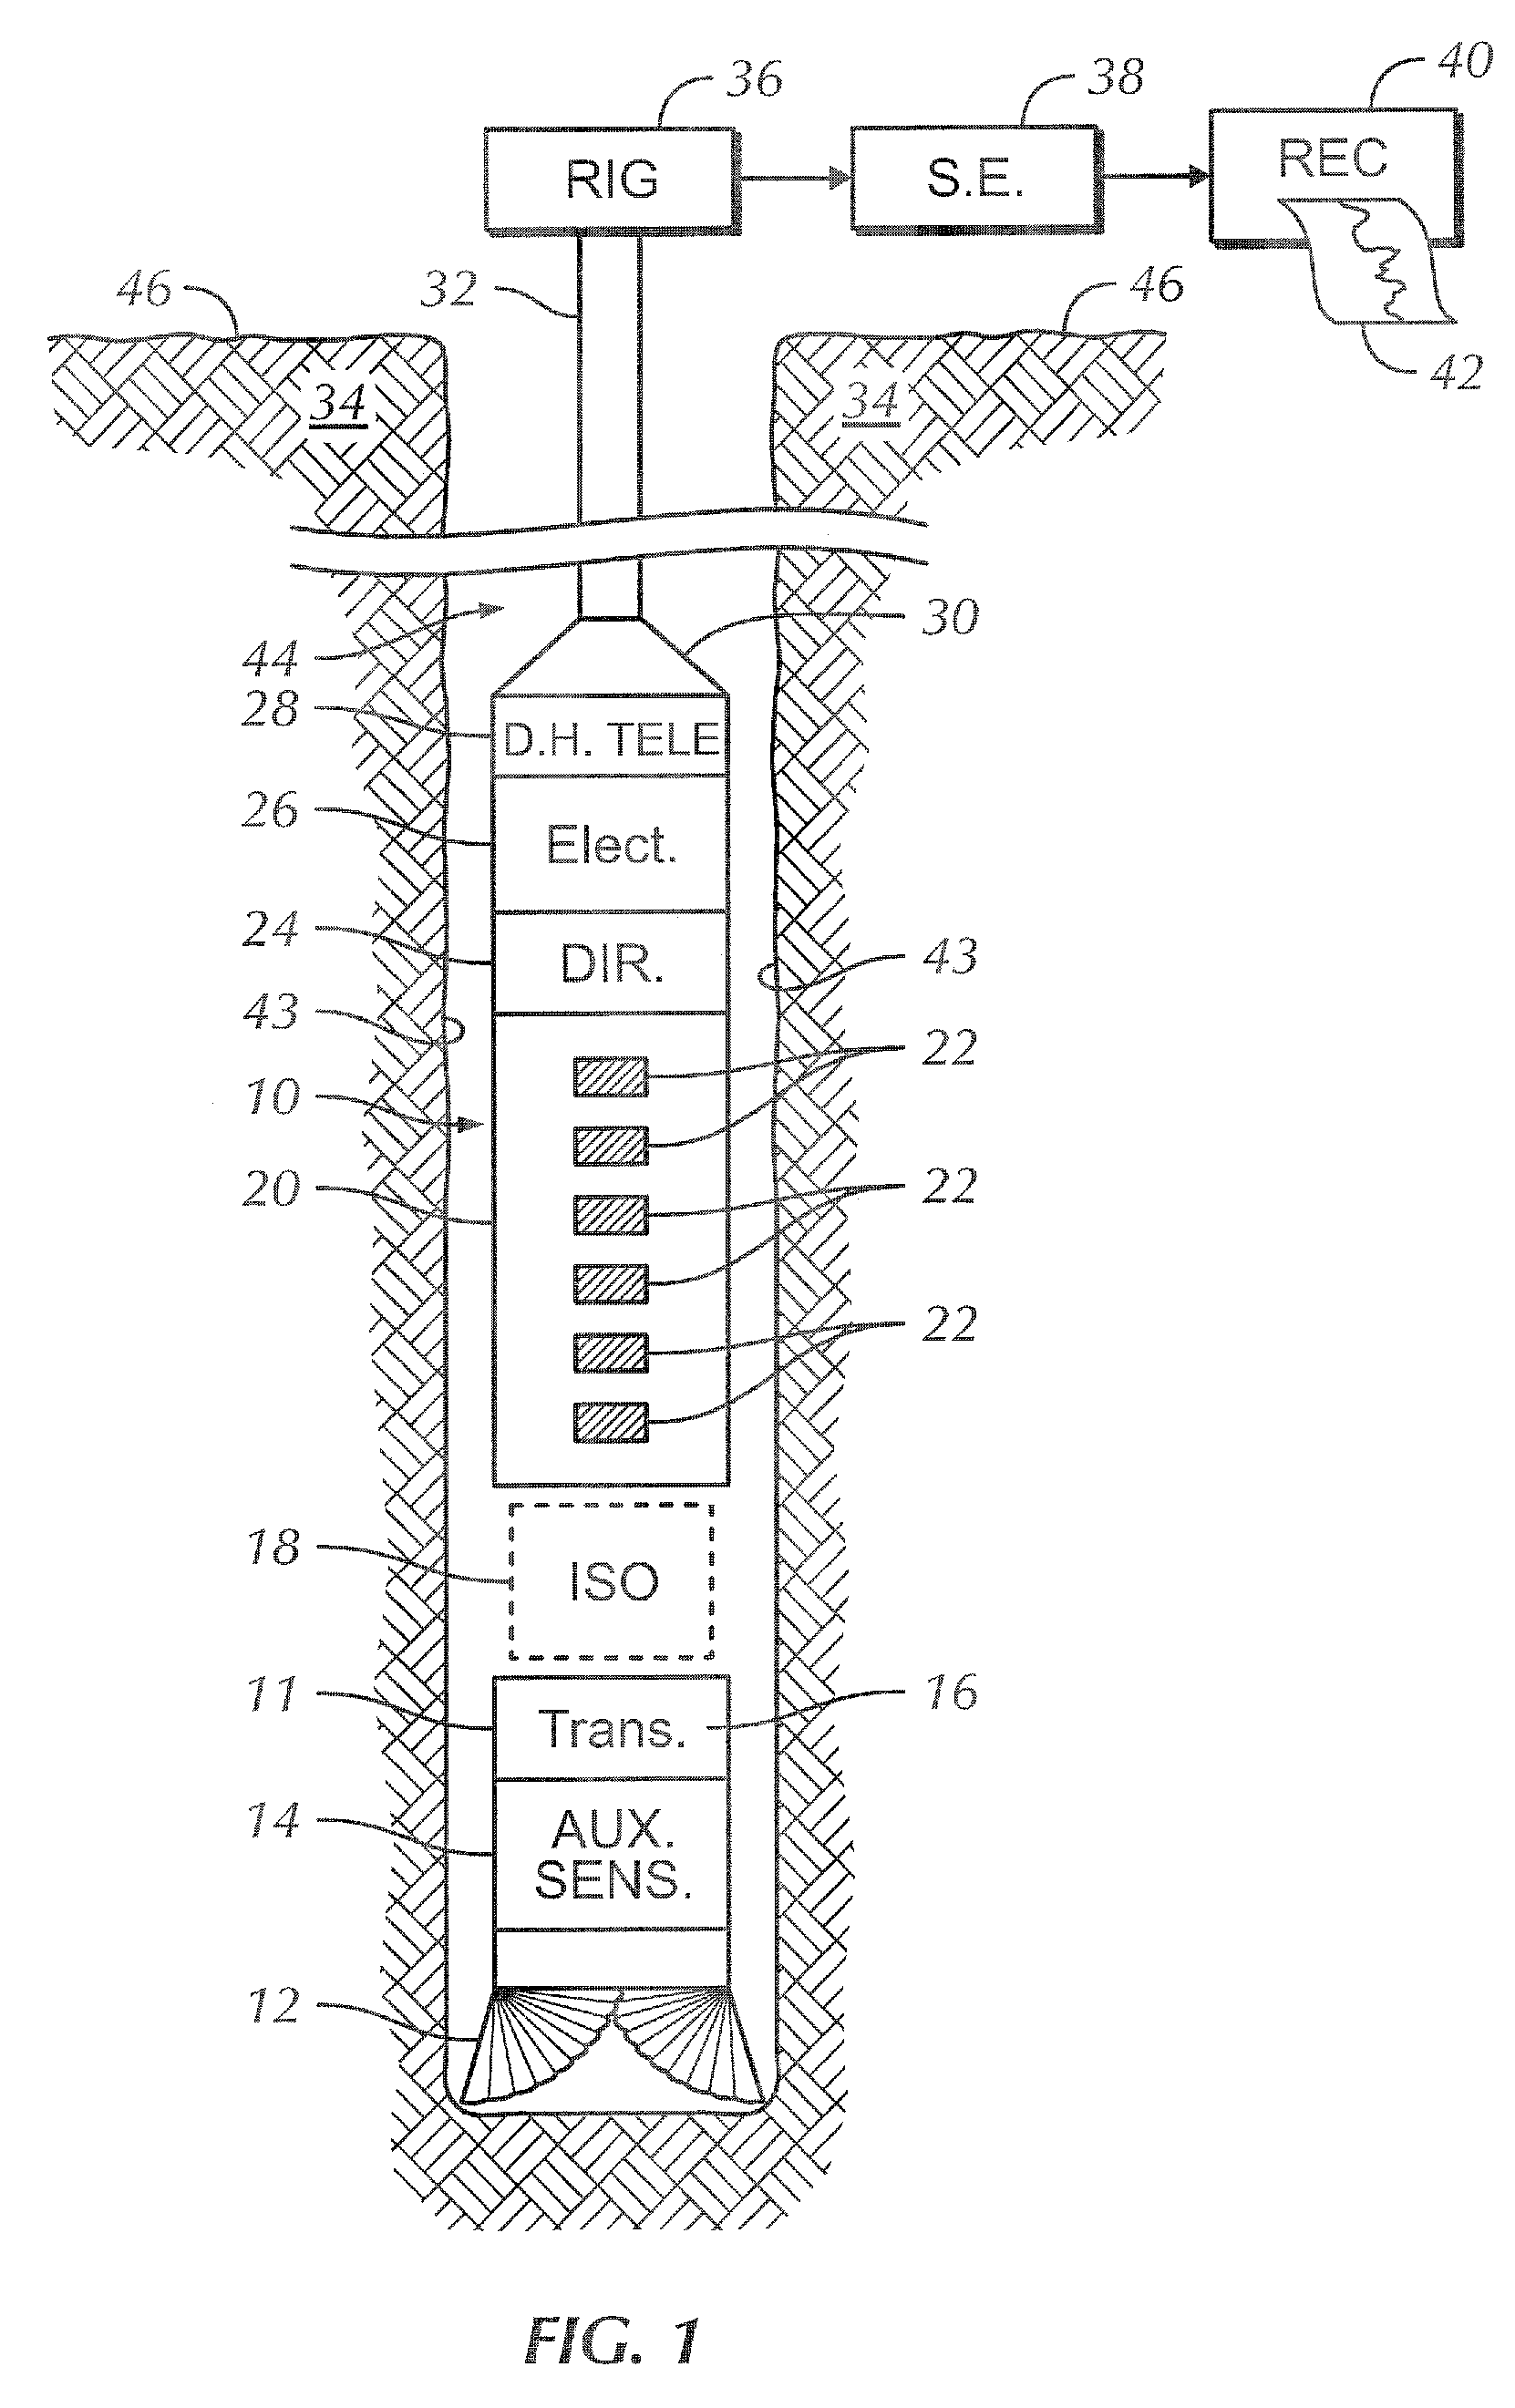 Monopole acoustic transmitter ring comprising piezoelectric material